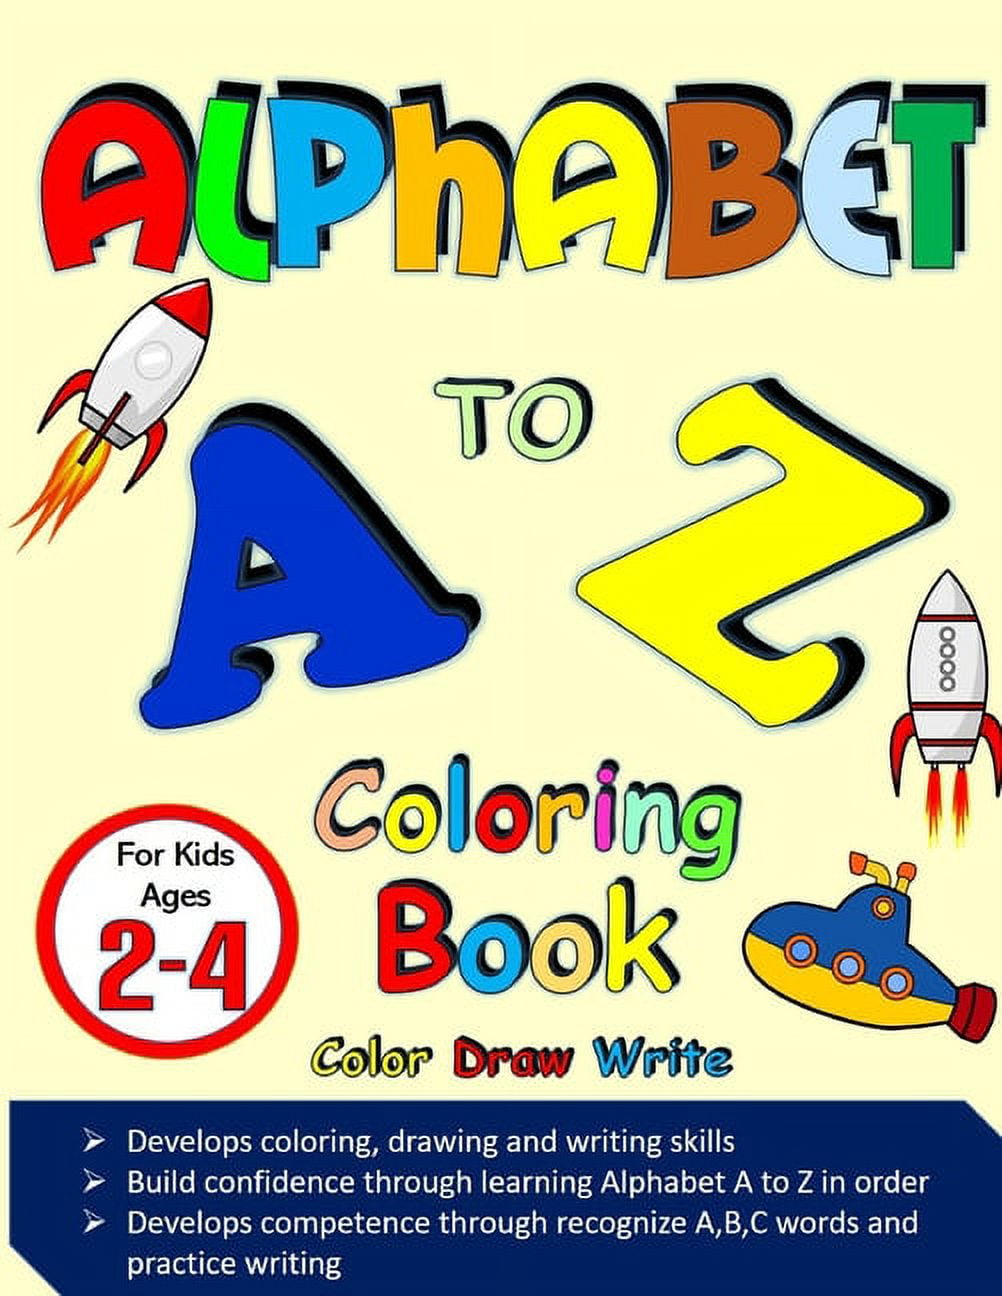 Pin by Jane Ann Scelzi on School ideas | Art drawings for kids, Drawing  pictures for kids, Alphabet drawing